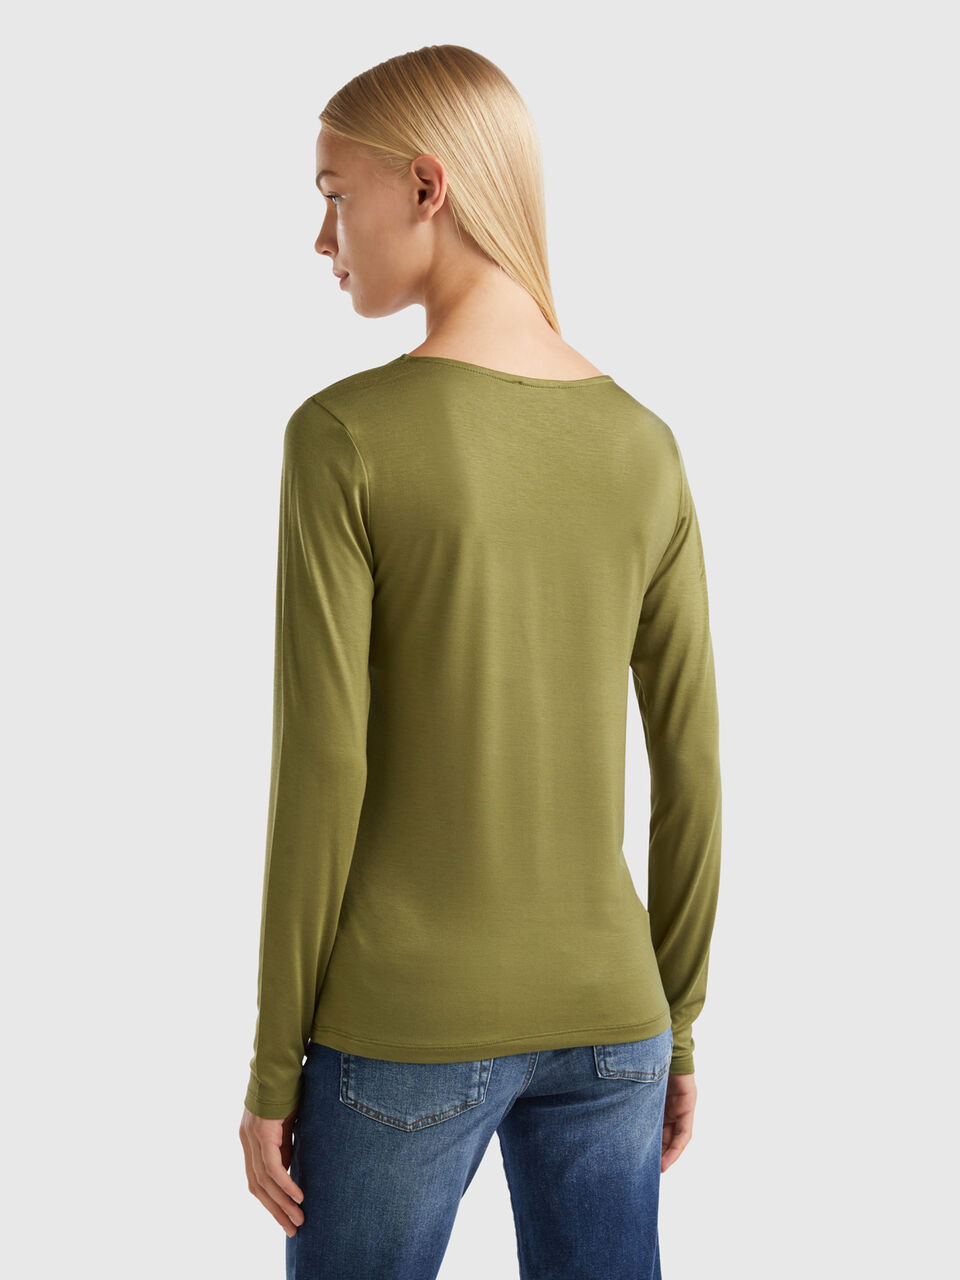 T-shirt in sustainable stretch viscose - Military Green | Benetton